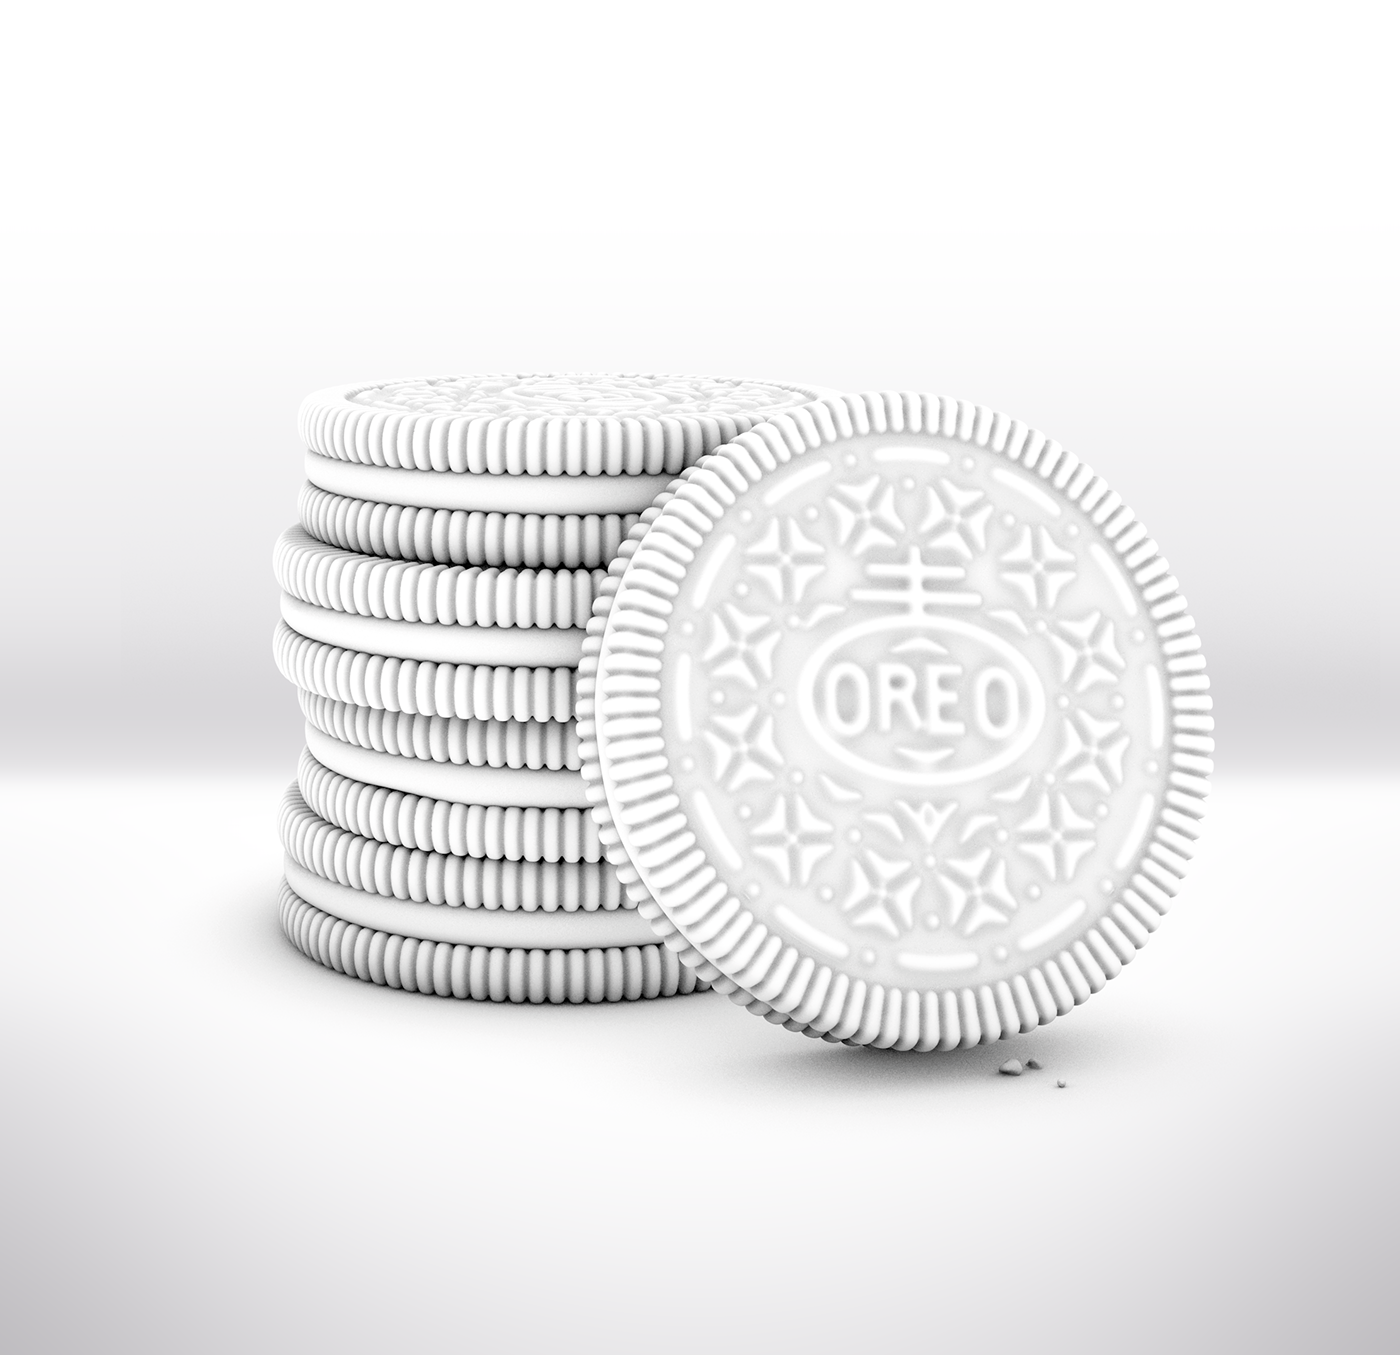 oreo biscuits 3D realistic Packaging